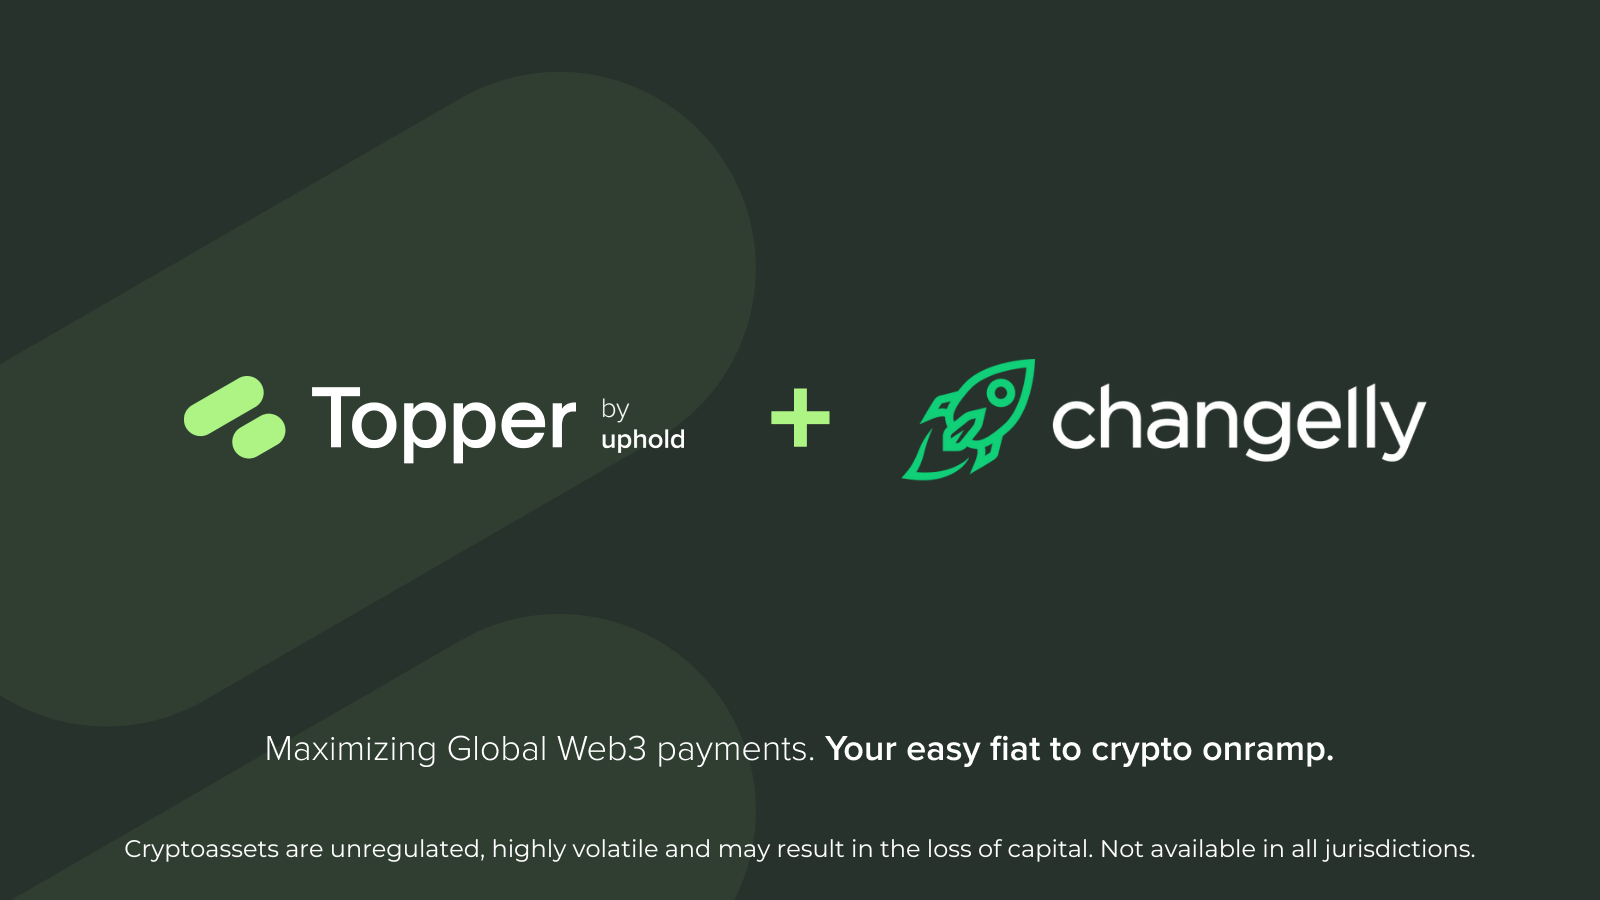 Changelly and Topper Partnership